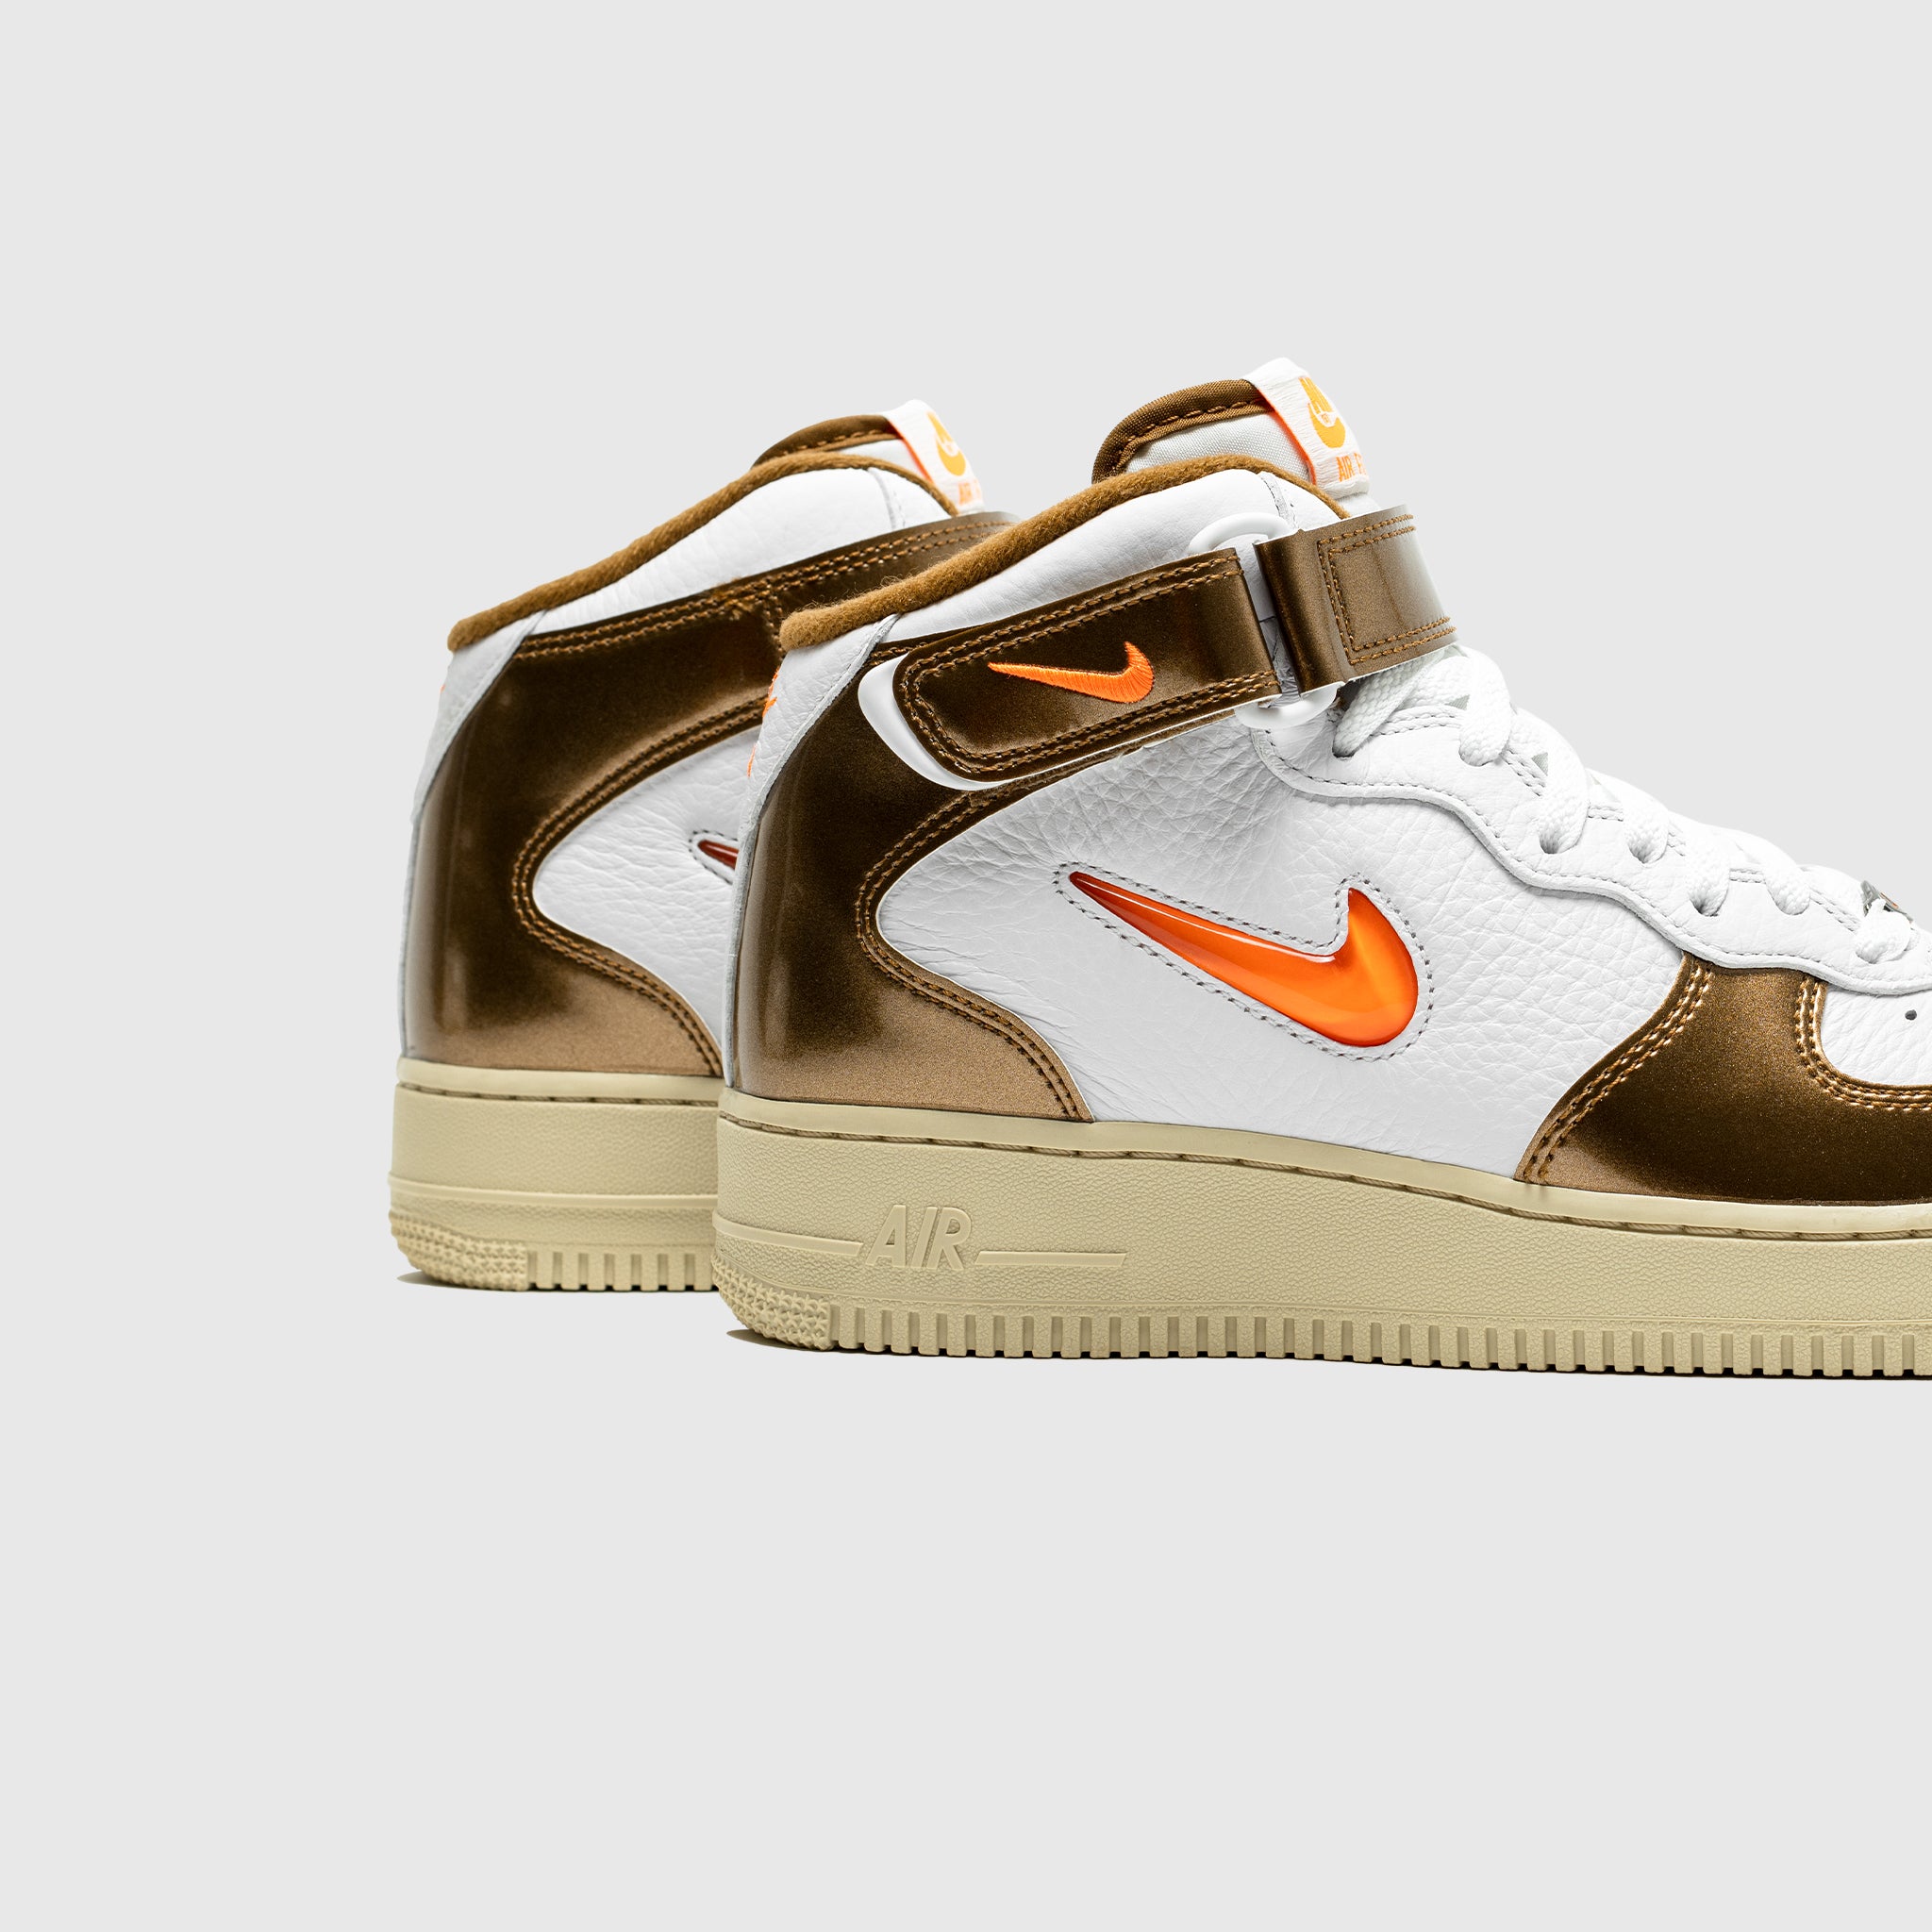 Nike Air Force 1 '07 Next sneakers in white and bronze